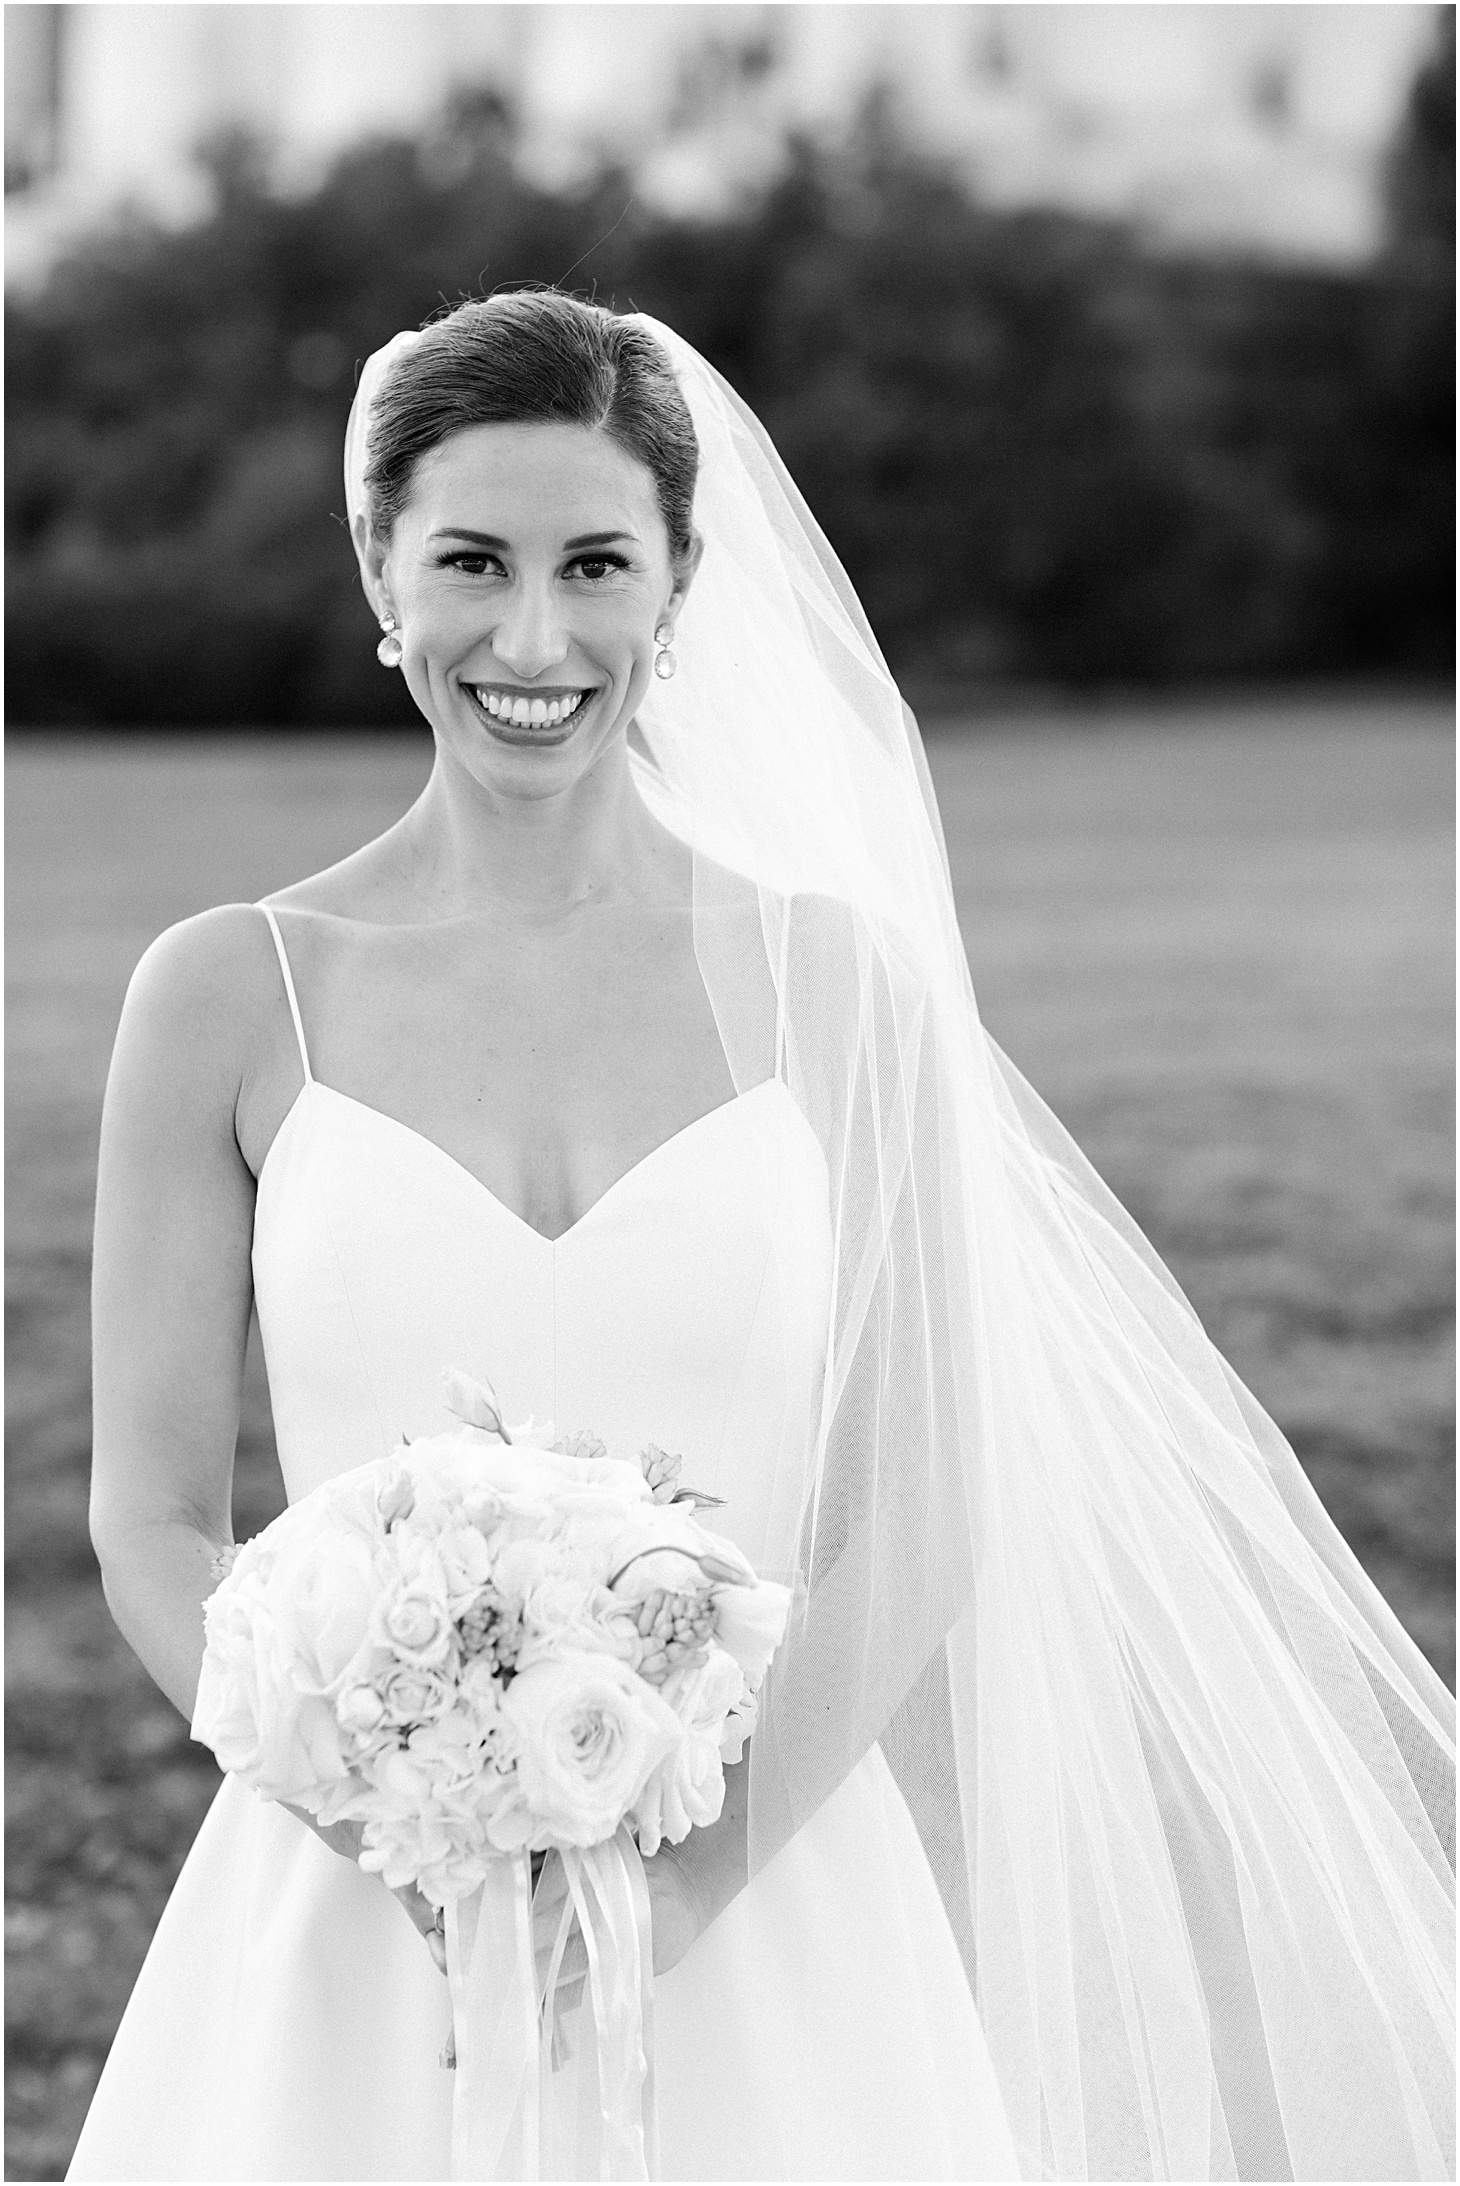 Amsale bride - A Thoroughly Washingtonian Wedding at Meridian House in DC by Sarah Bradshaw 